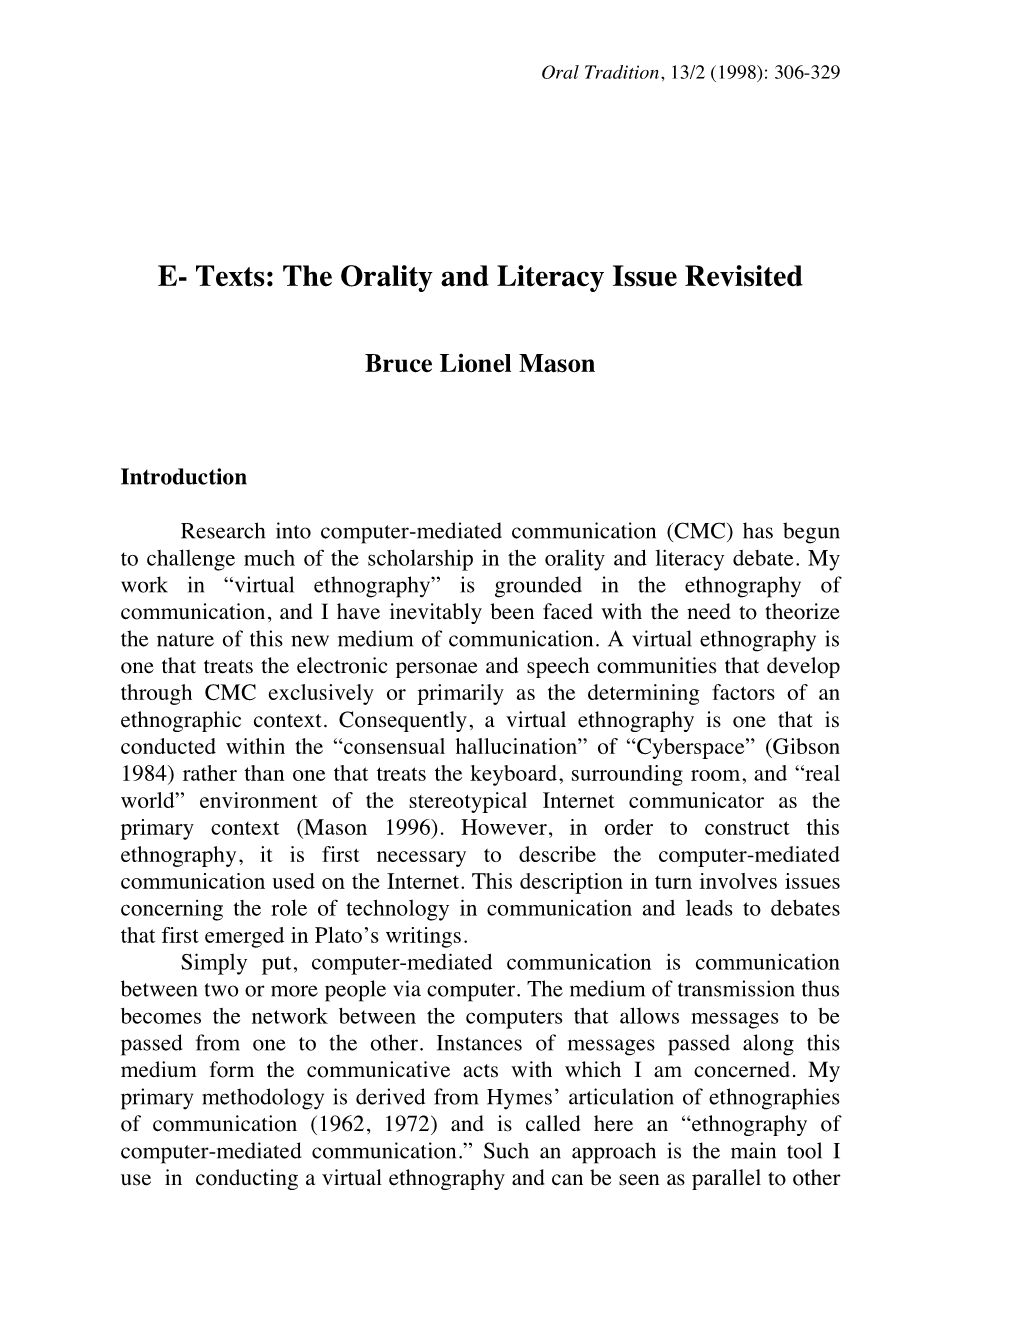 The Orality and Literacy Issue Revisited